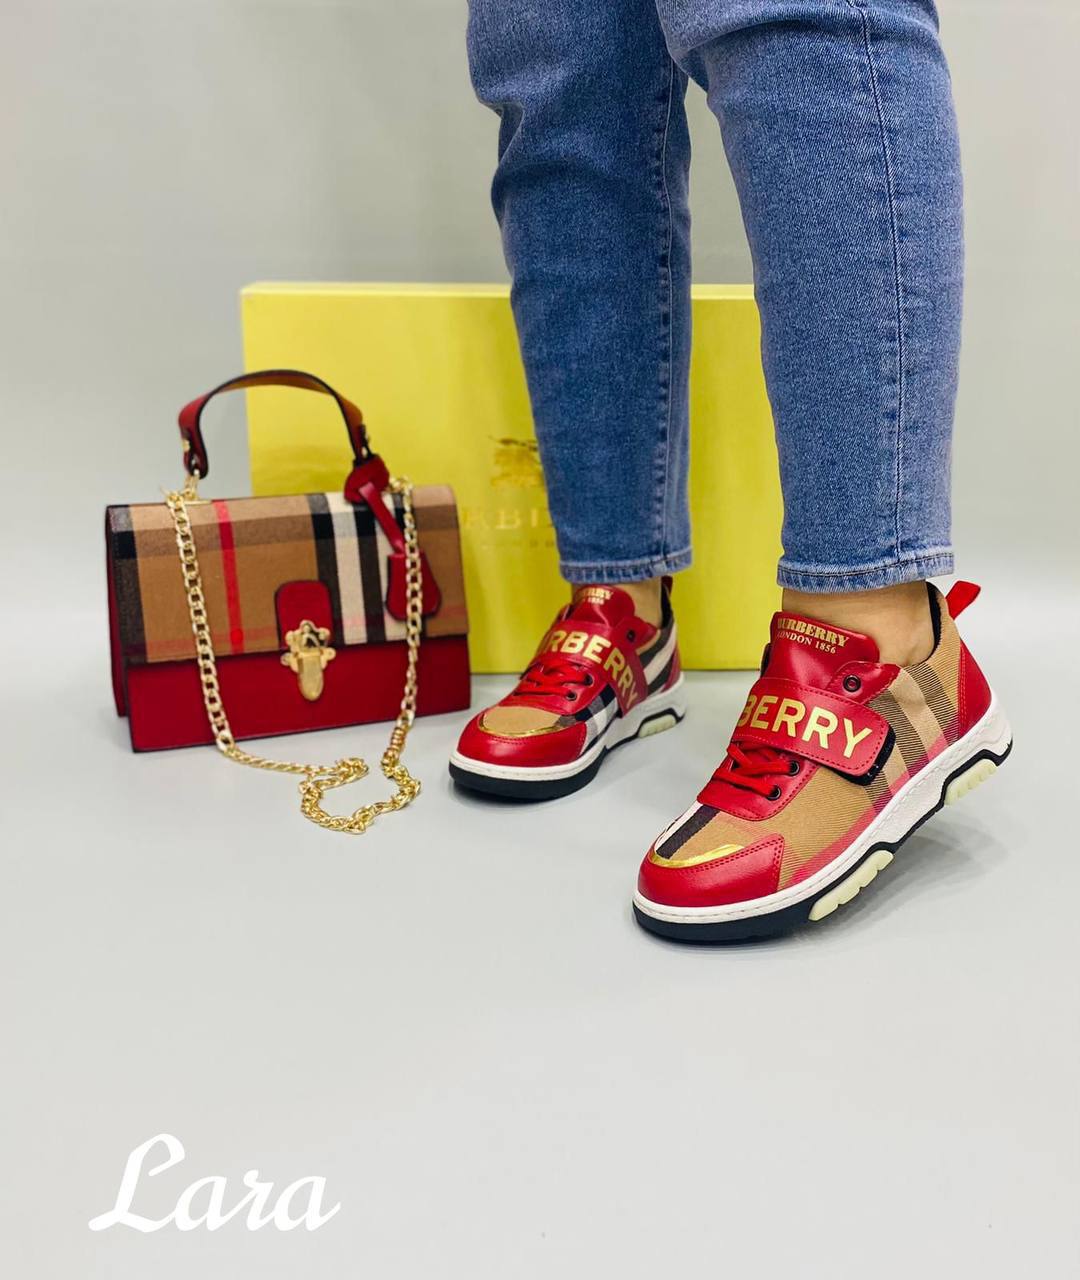 Burberry sneakers and handbags